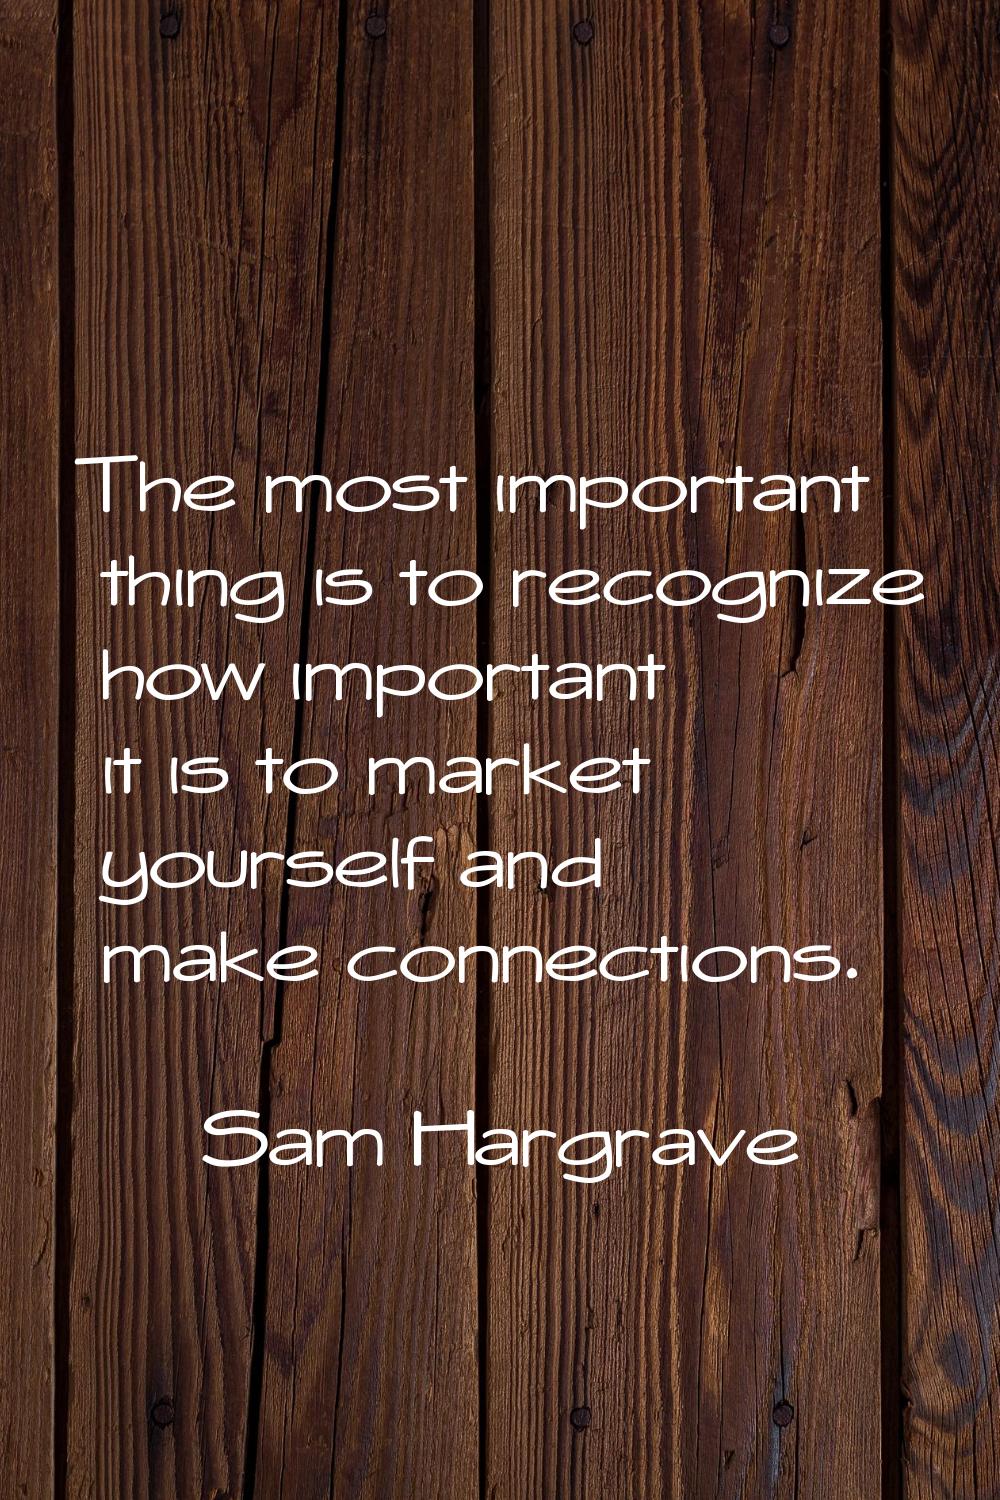 The most important thing is to recognize how important it is to market yourself and make connection